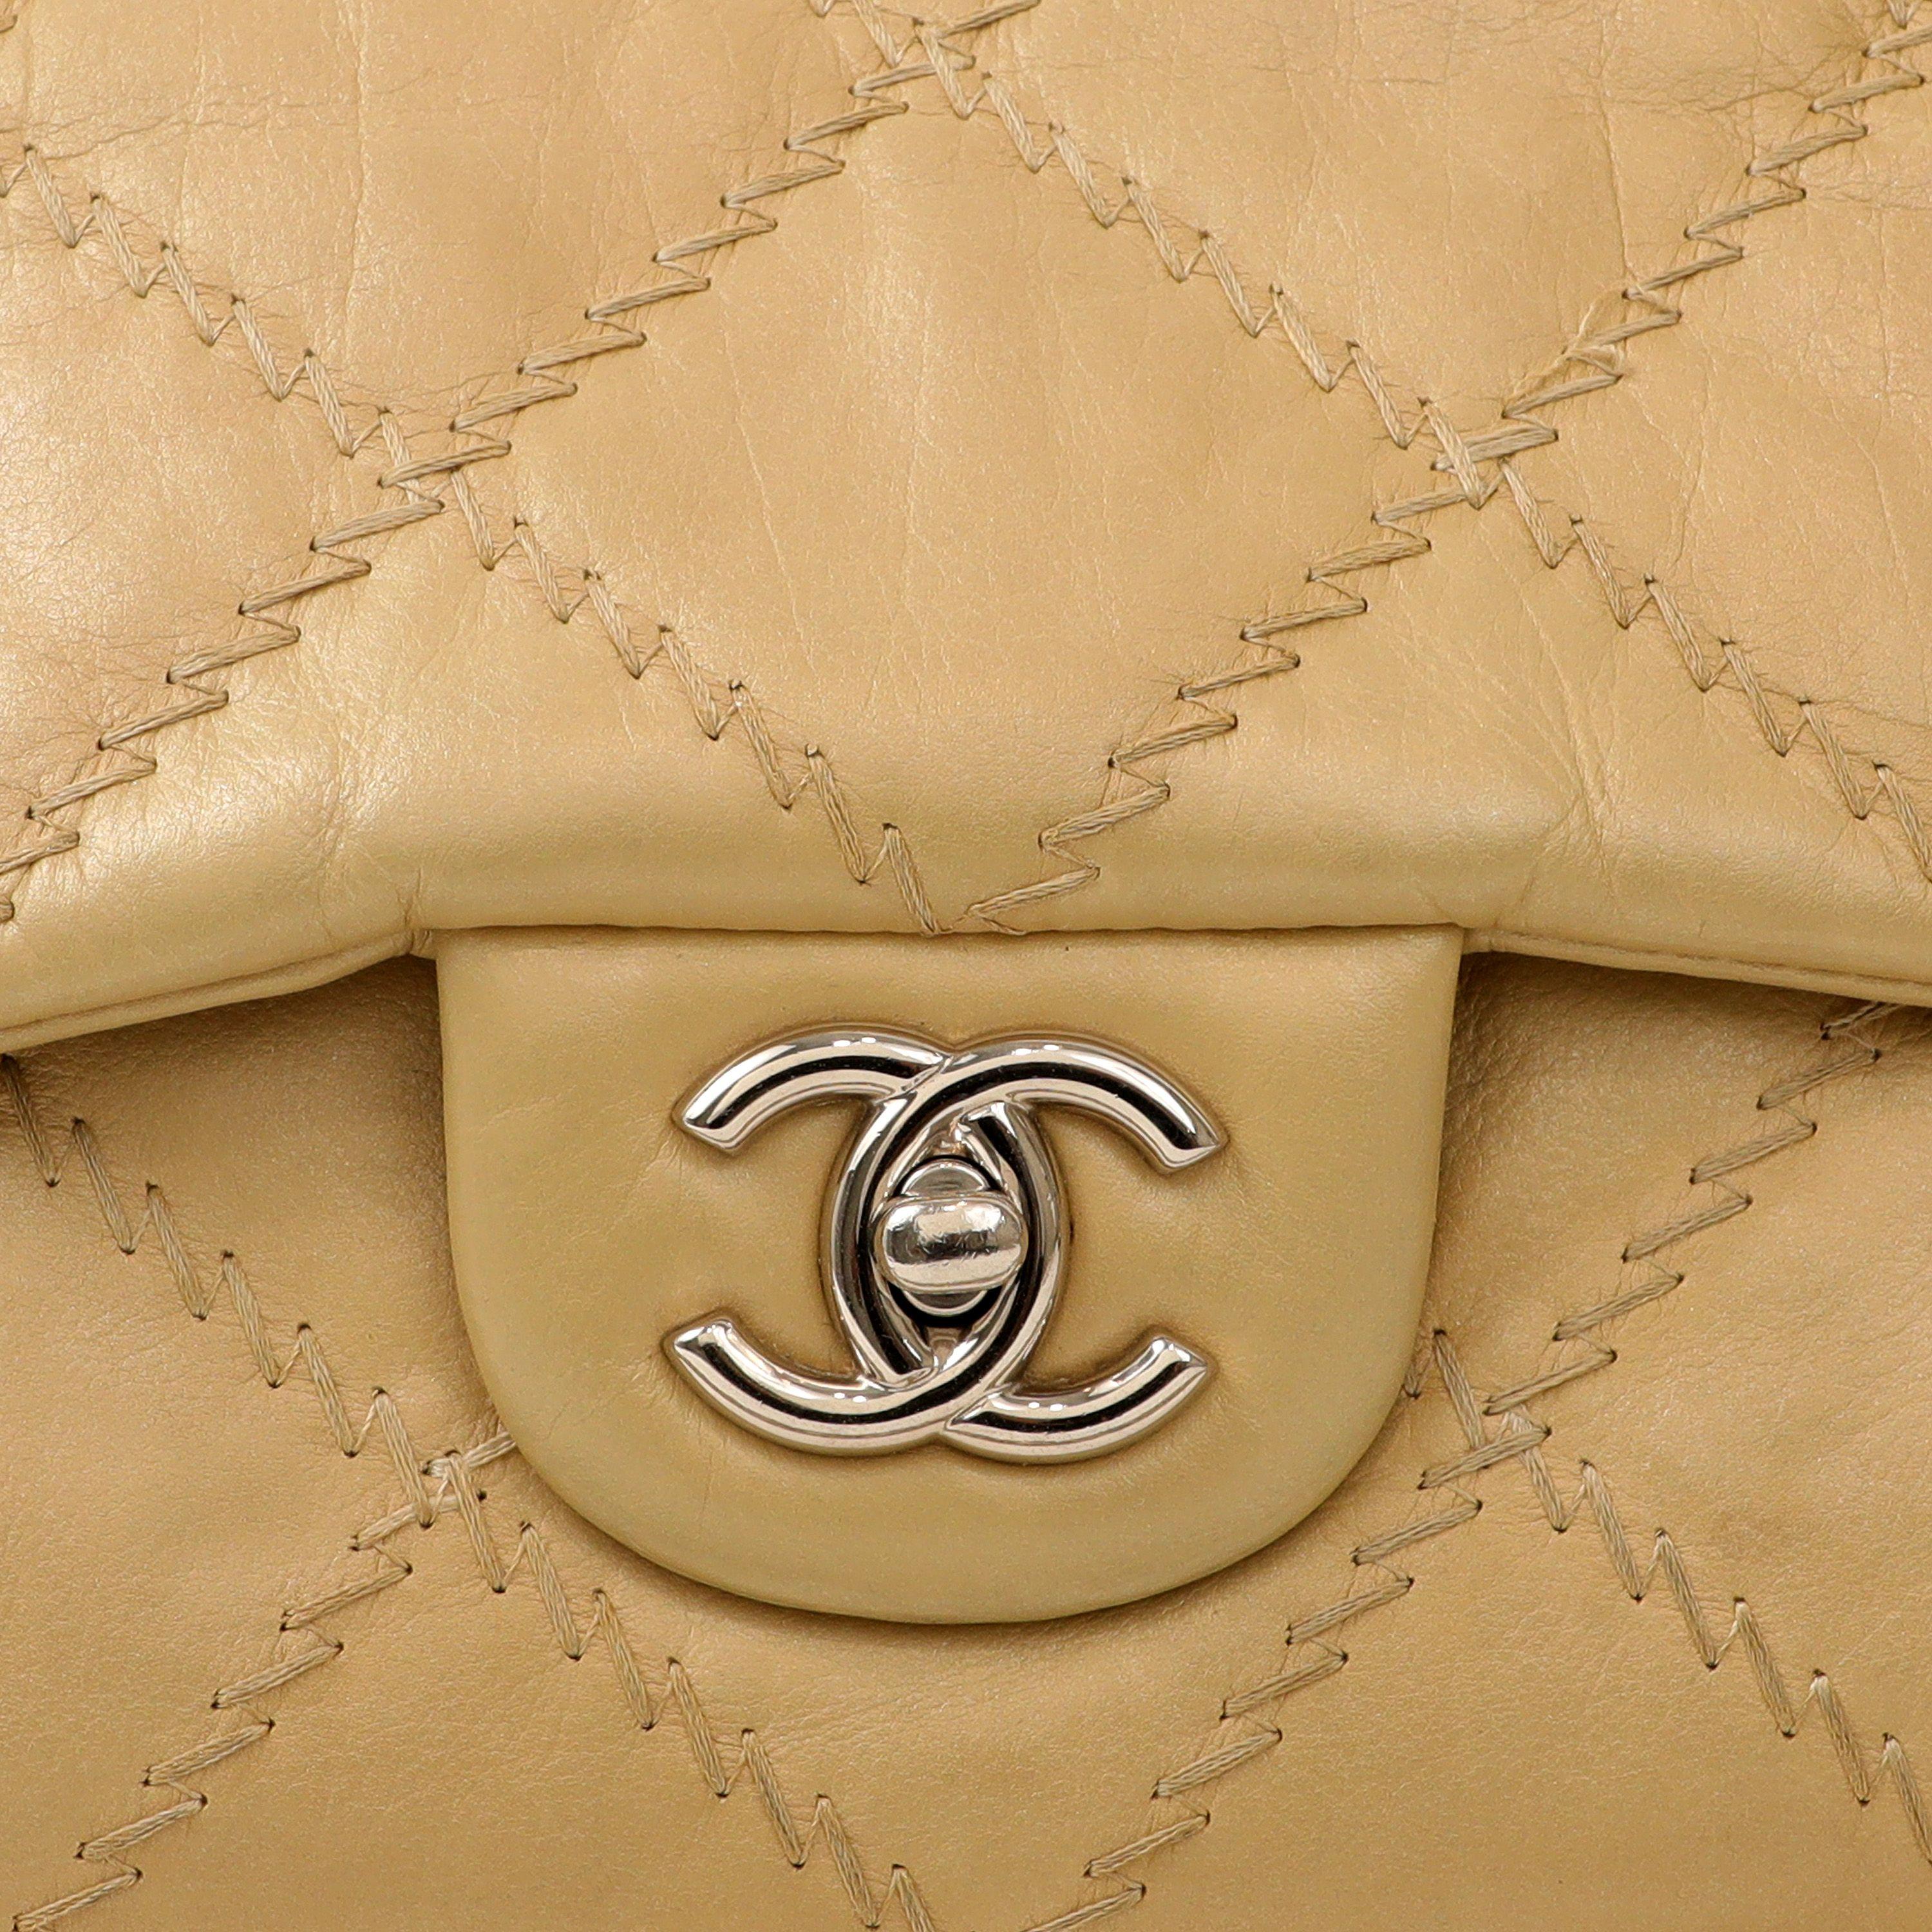 This authentic Chanel Champagne Gold East West Ultra Stitch Bag is pristine.  Perfectly warm and neutral champagne leather is top stitched in raised ultra stitch diamond pattern.  Silver interlocking CC twist lock secures the exterior flap. May be